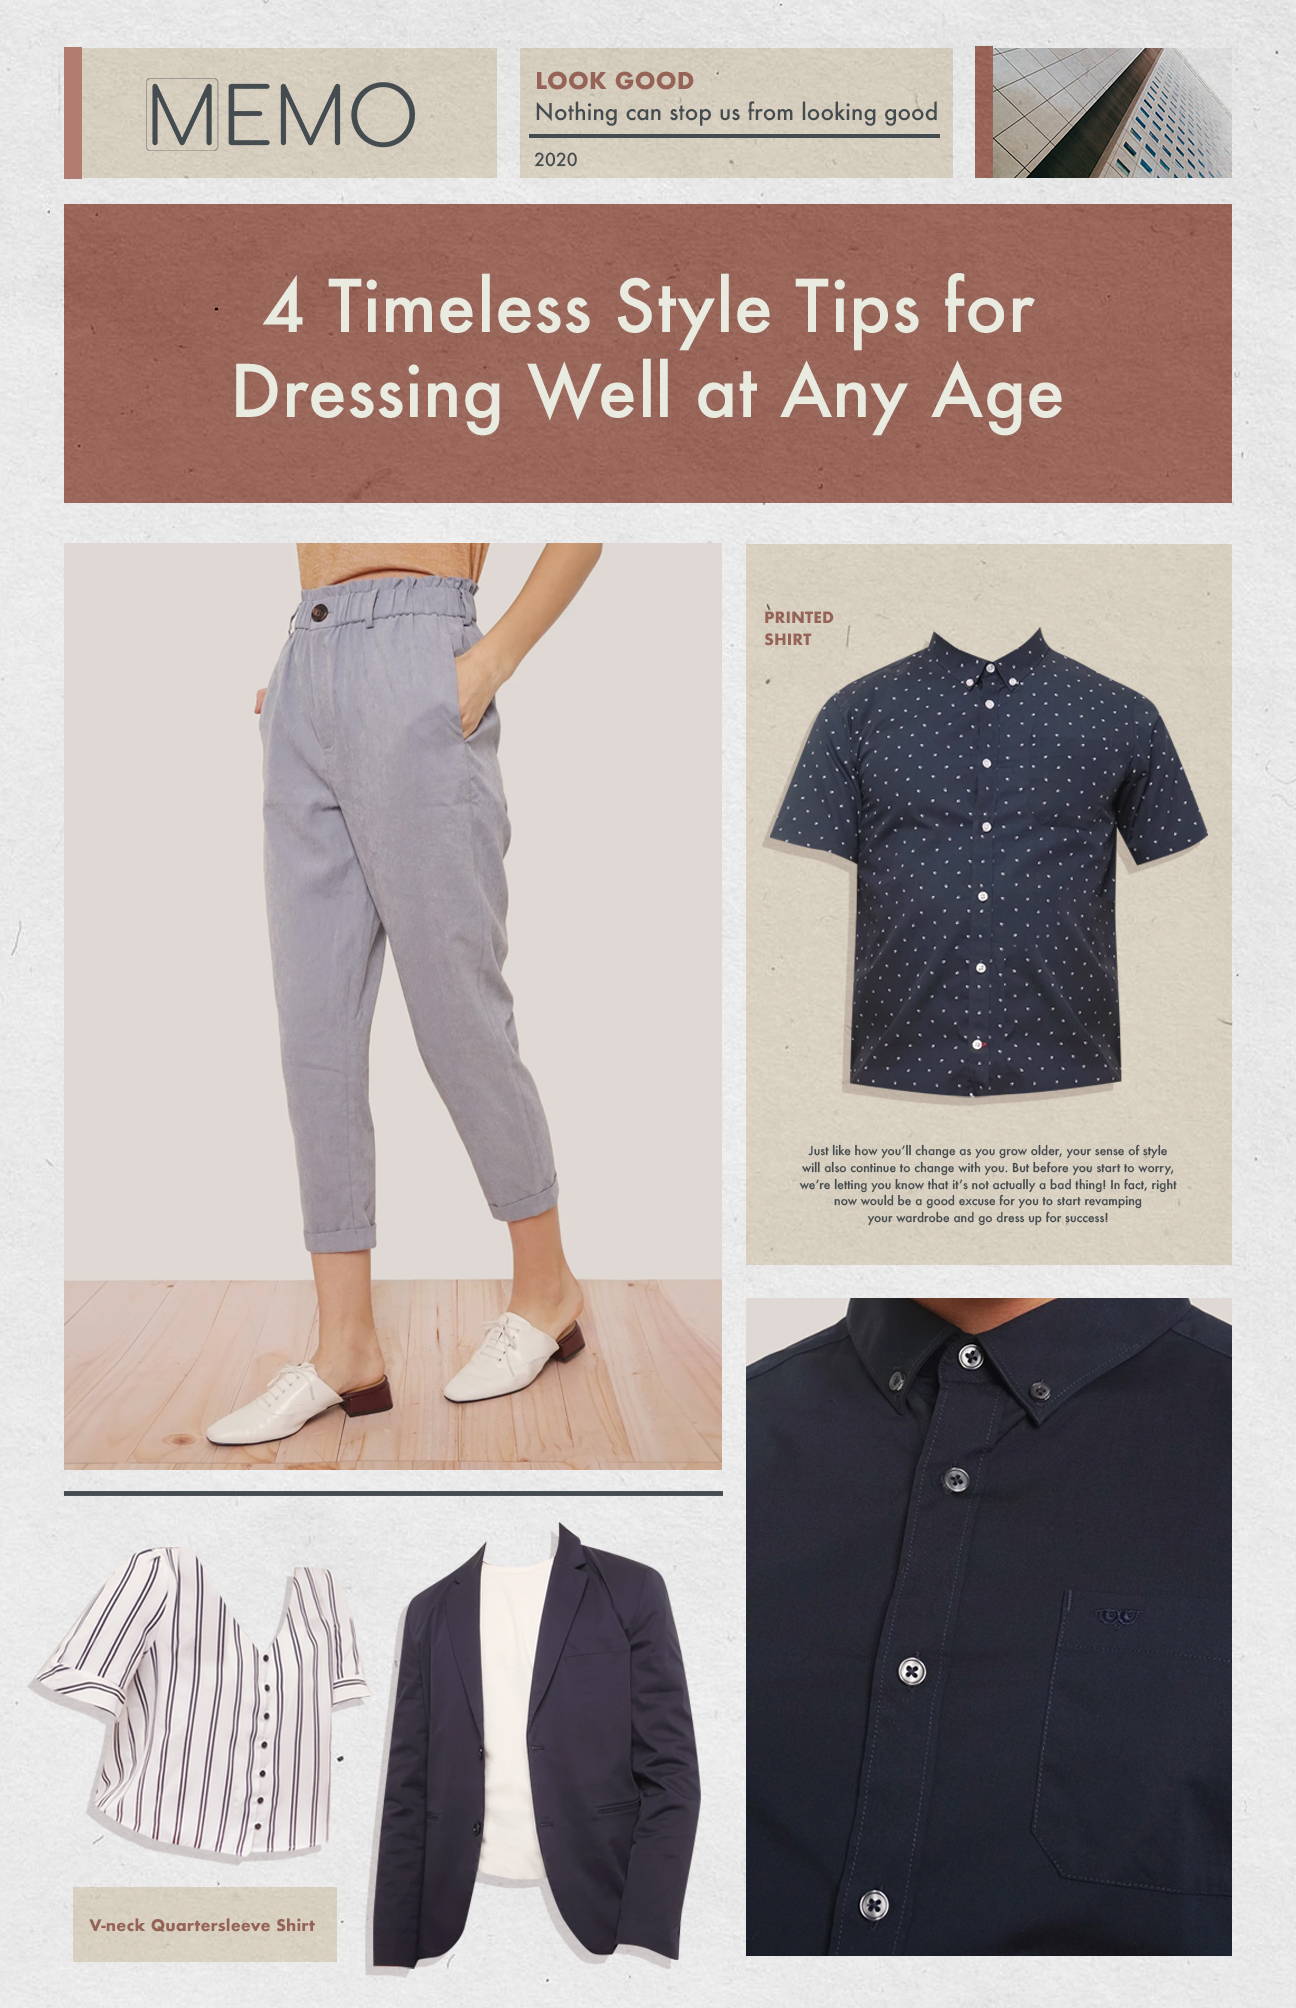 4 Timeless Style Tips for Dressing Well at Any Age – Memo